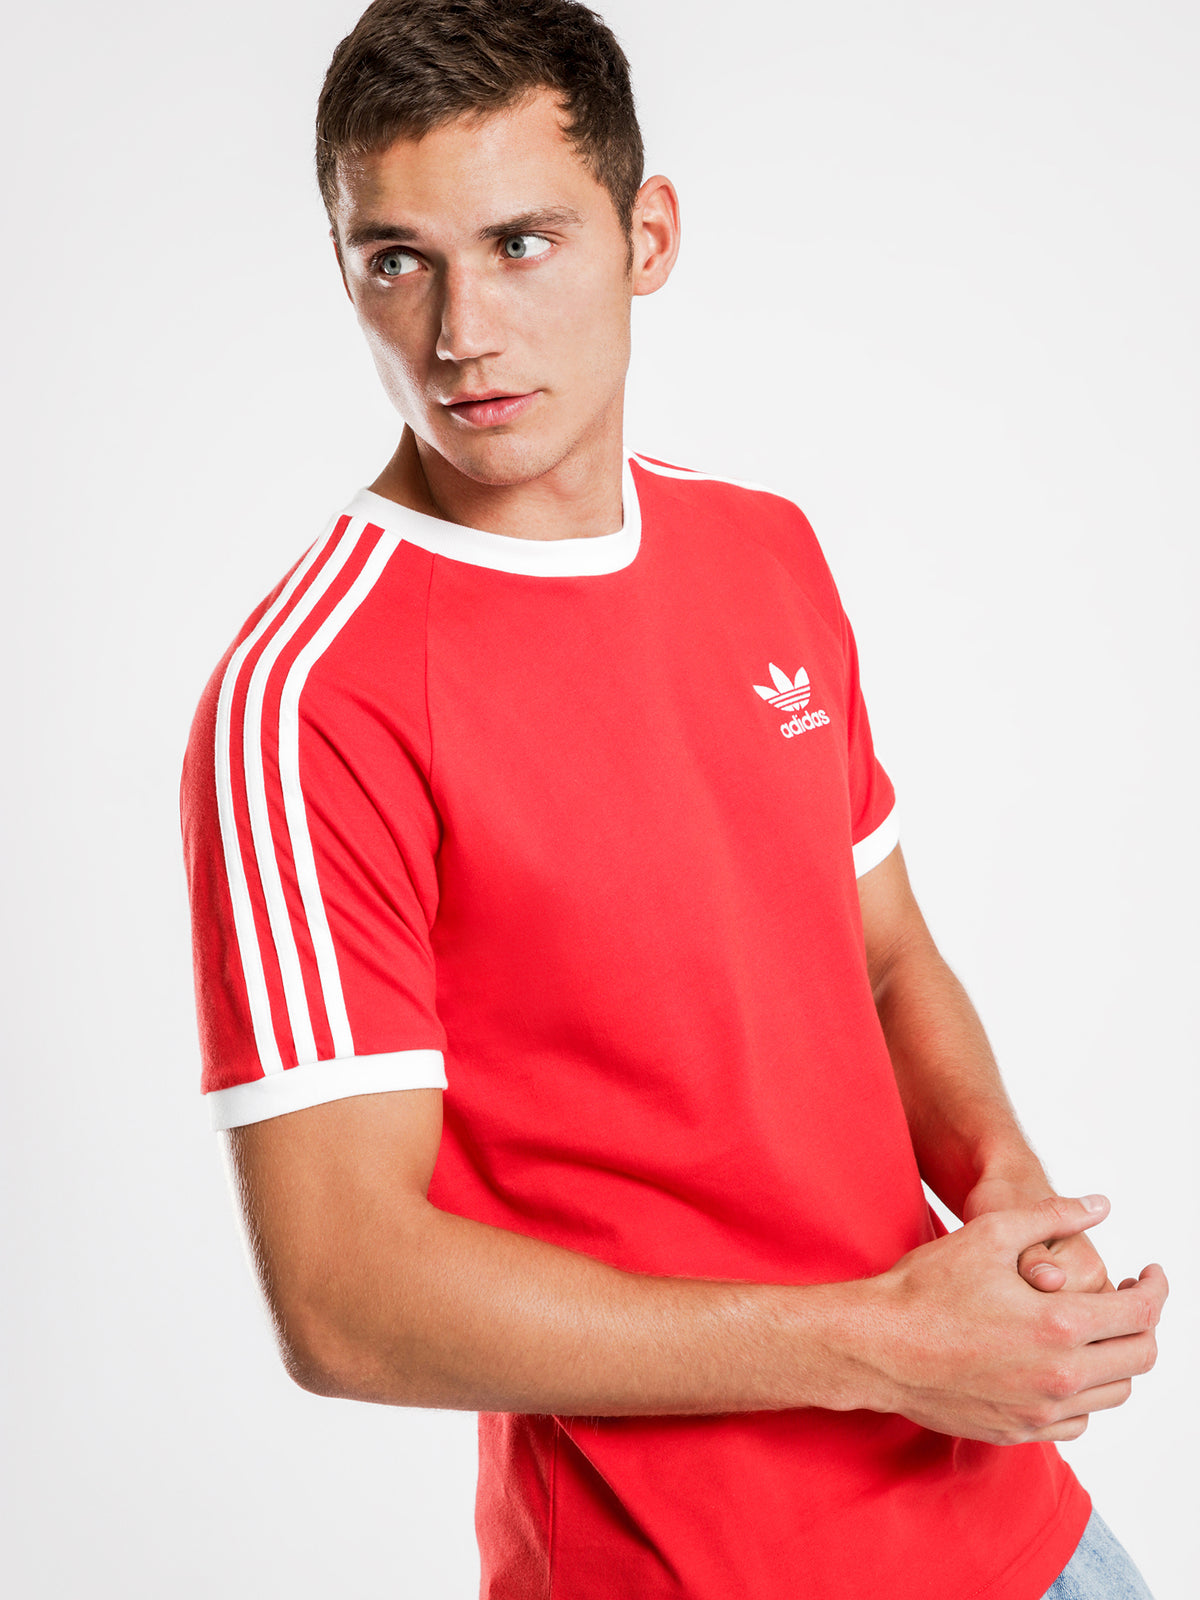 Originals 3 Stripes T-Shirt in Lush Red